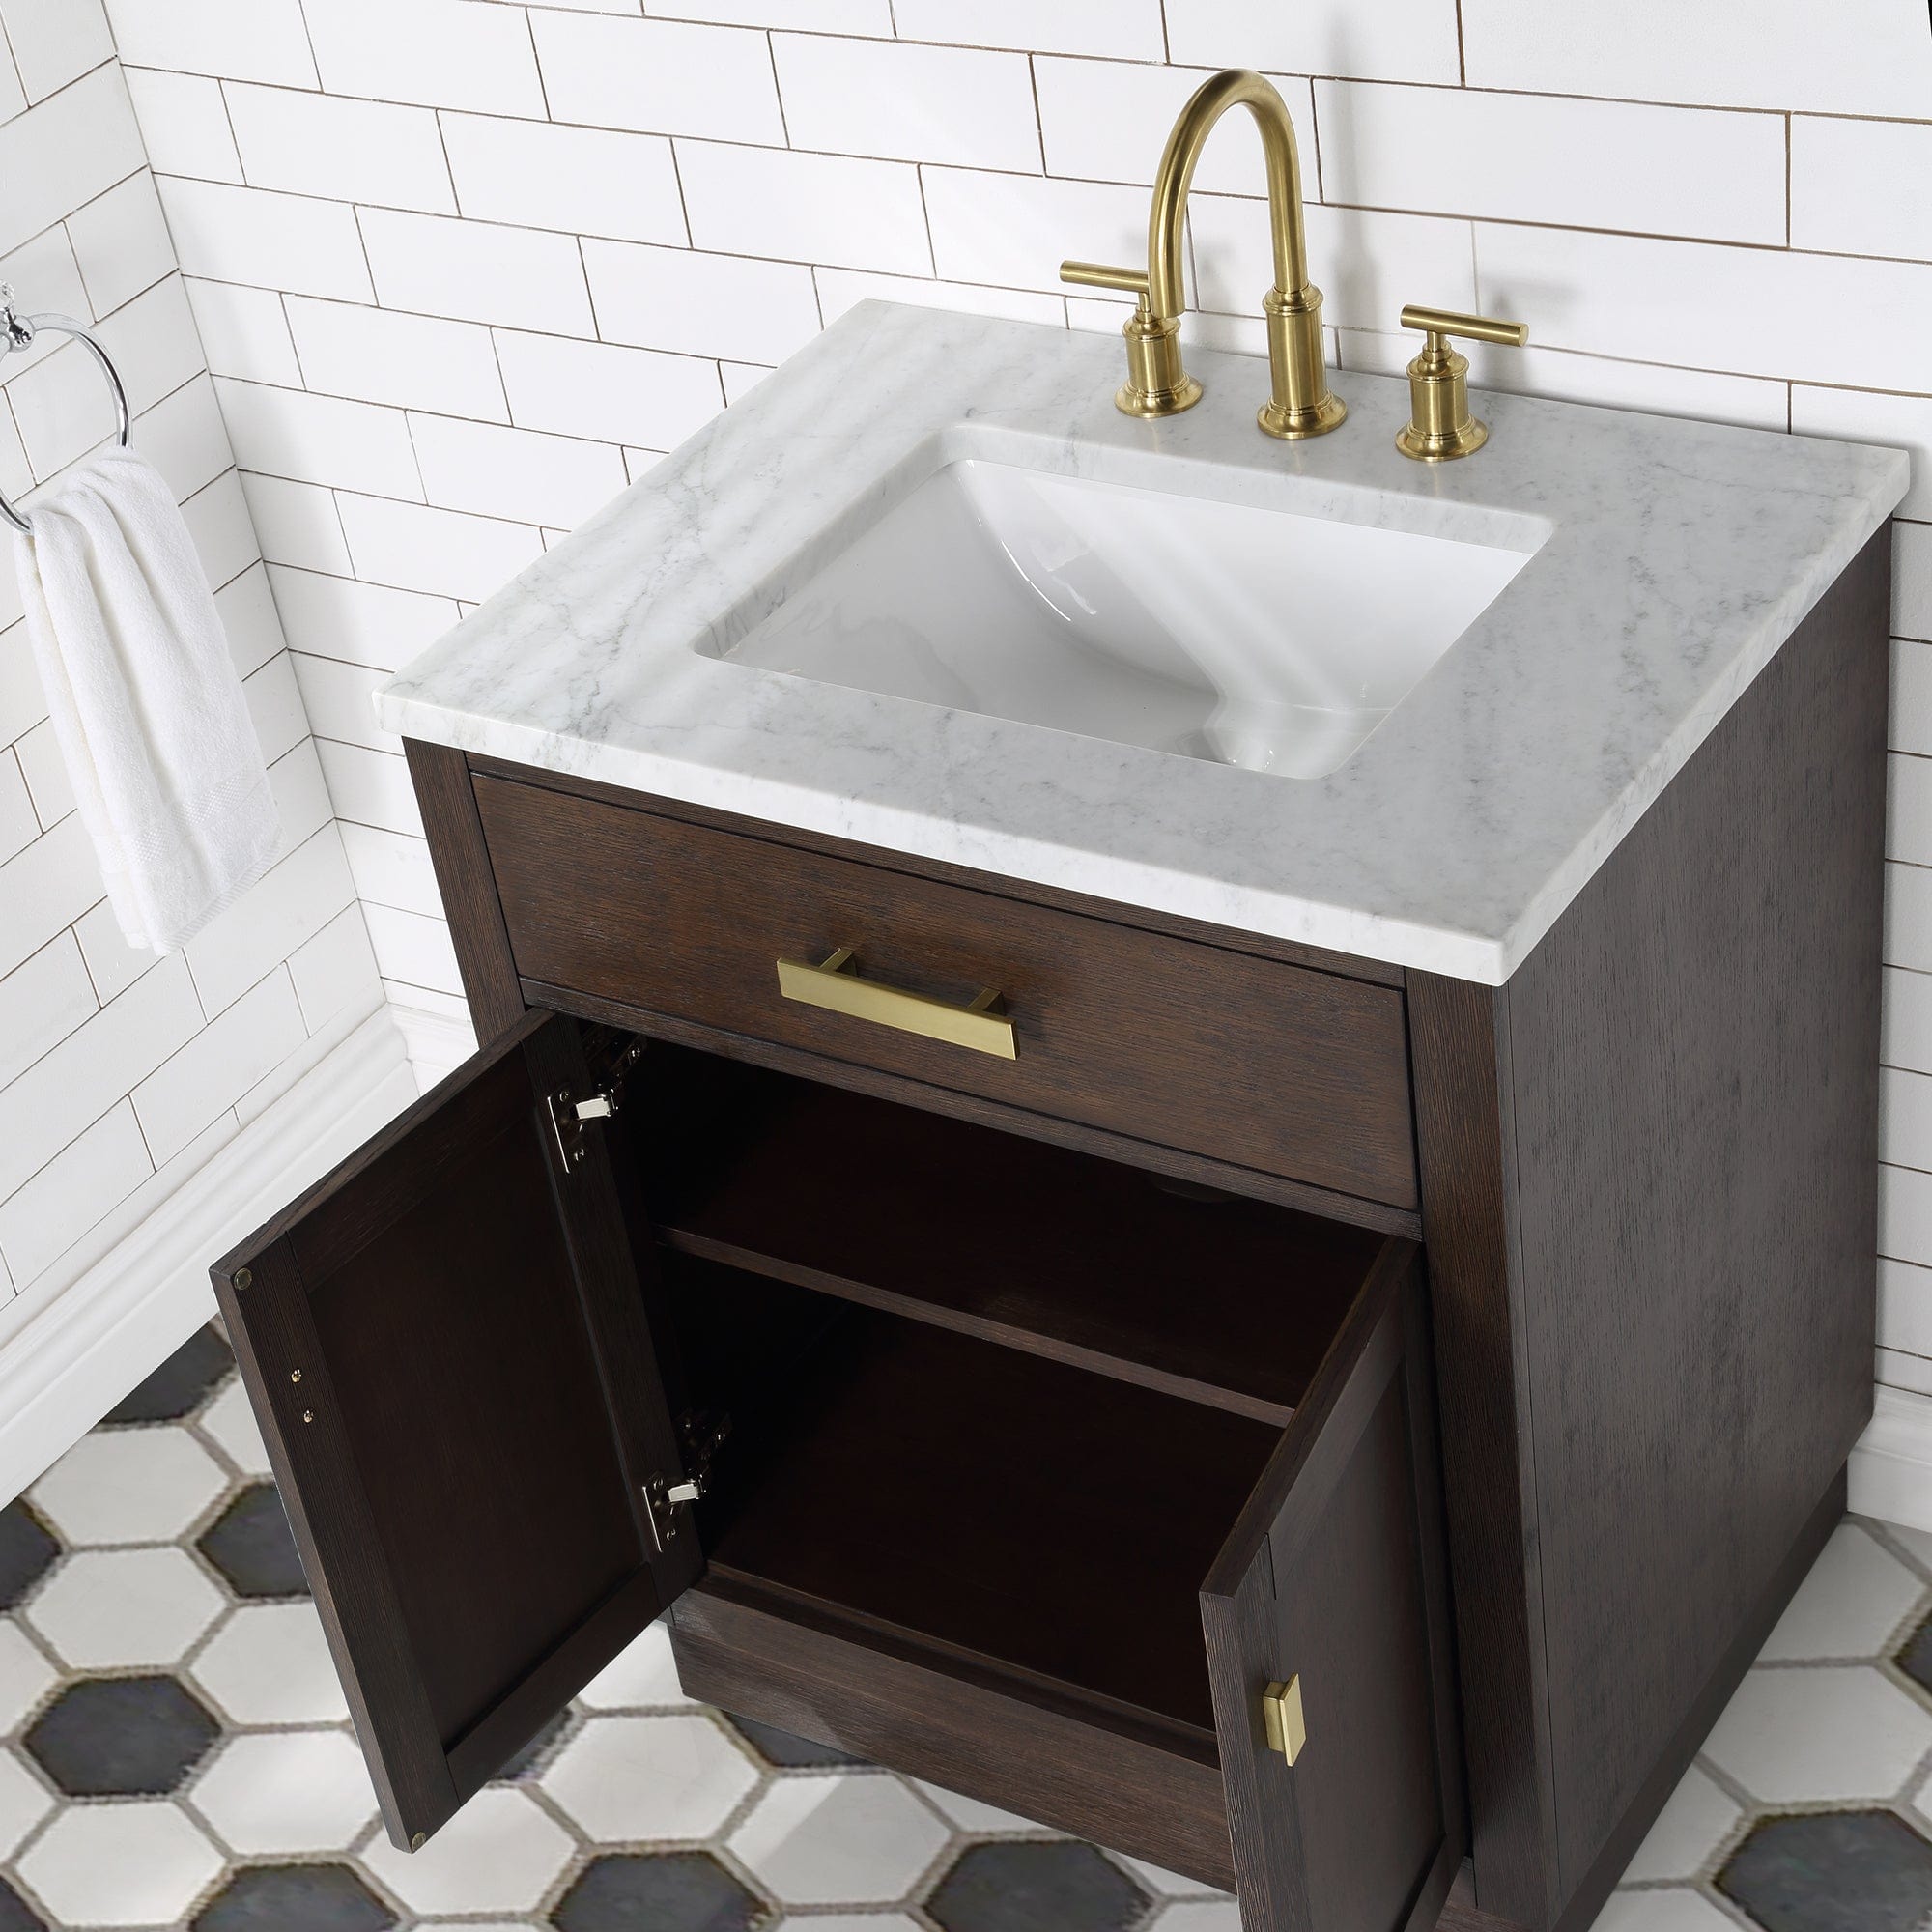 Chestnut 30 In. Single Sink Carrara White Marble Countertop Vanity In Brown Oak with Grooseneck Faucet and Mirror - Molaix732030764682CH30CW06BK-R21BL1406